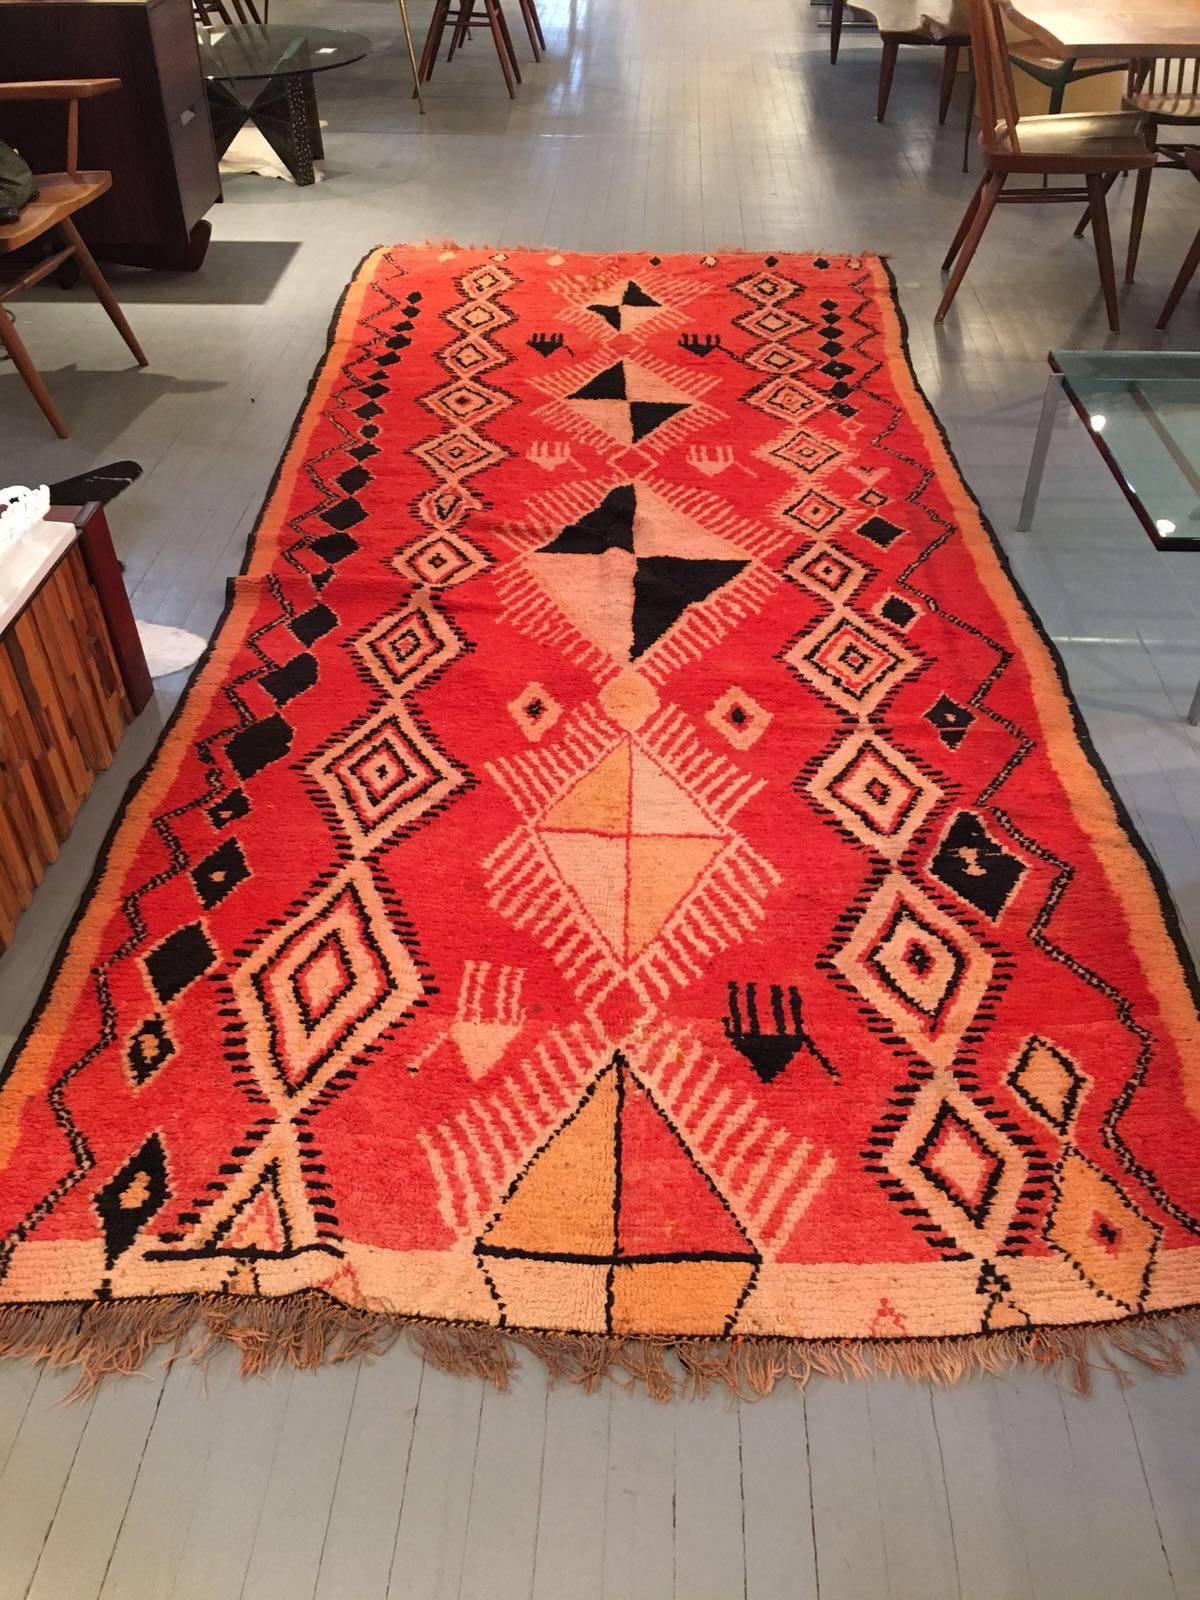 A striking Berber wool long rug with brilliant colors and geometrical patterns featuring repeating central medallions and borders, this rug was woven in Morocco by the tribal Berbers, circa second half of the 20th century. An impressive 140 inches